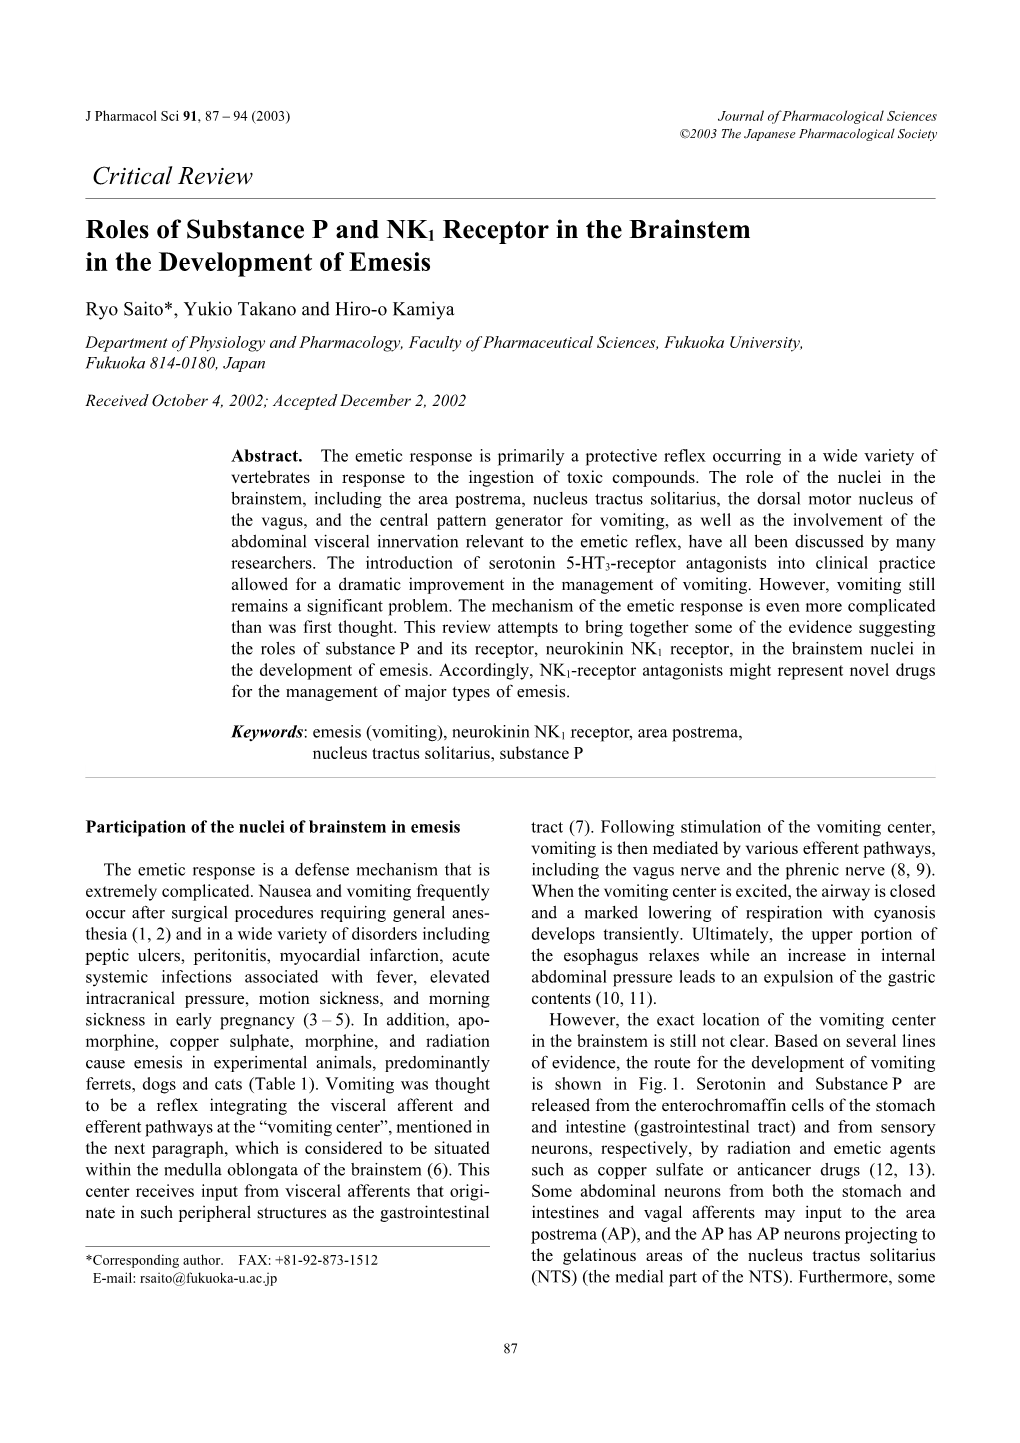 Roles of Substance P and NK1 Receptor in the Brainstem in the Development of Emesis